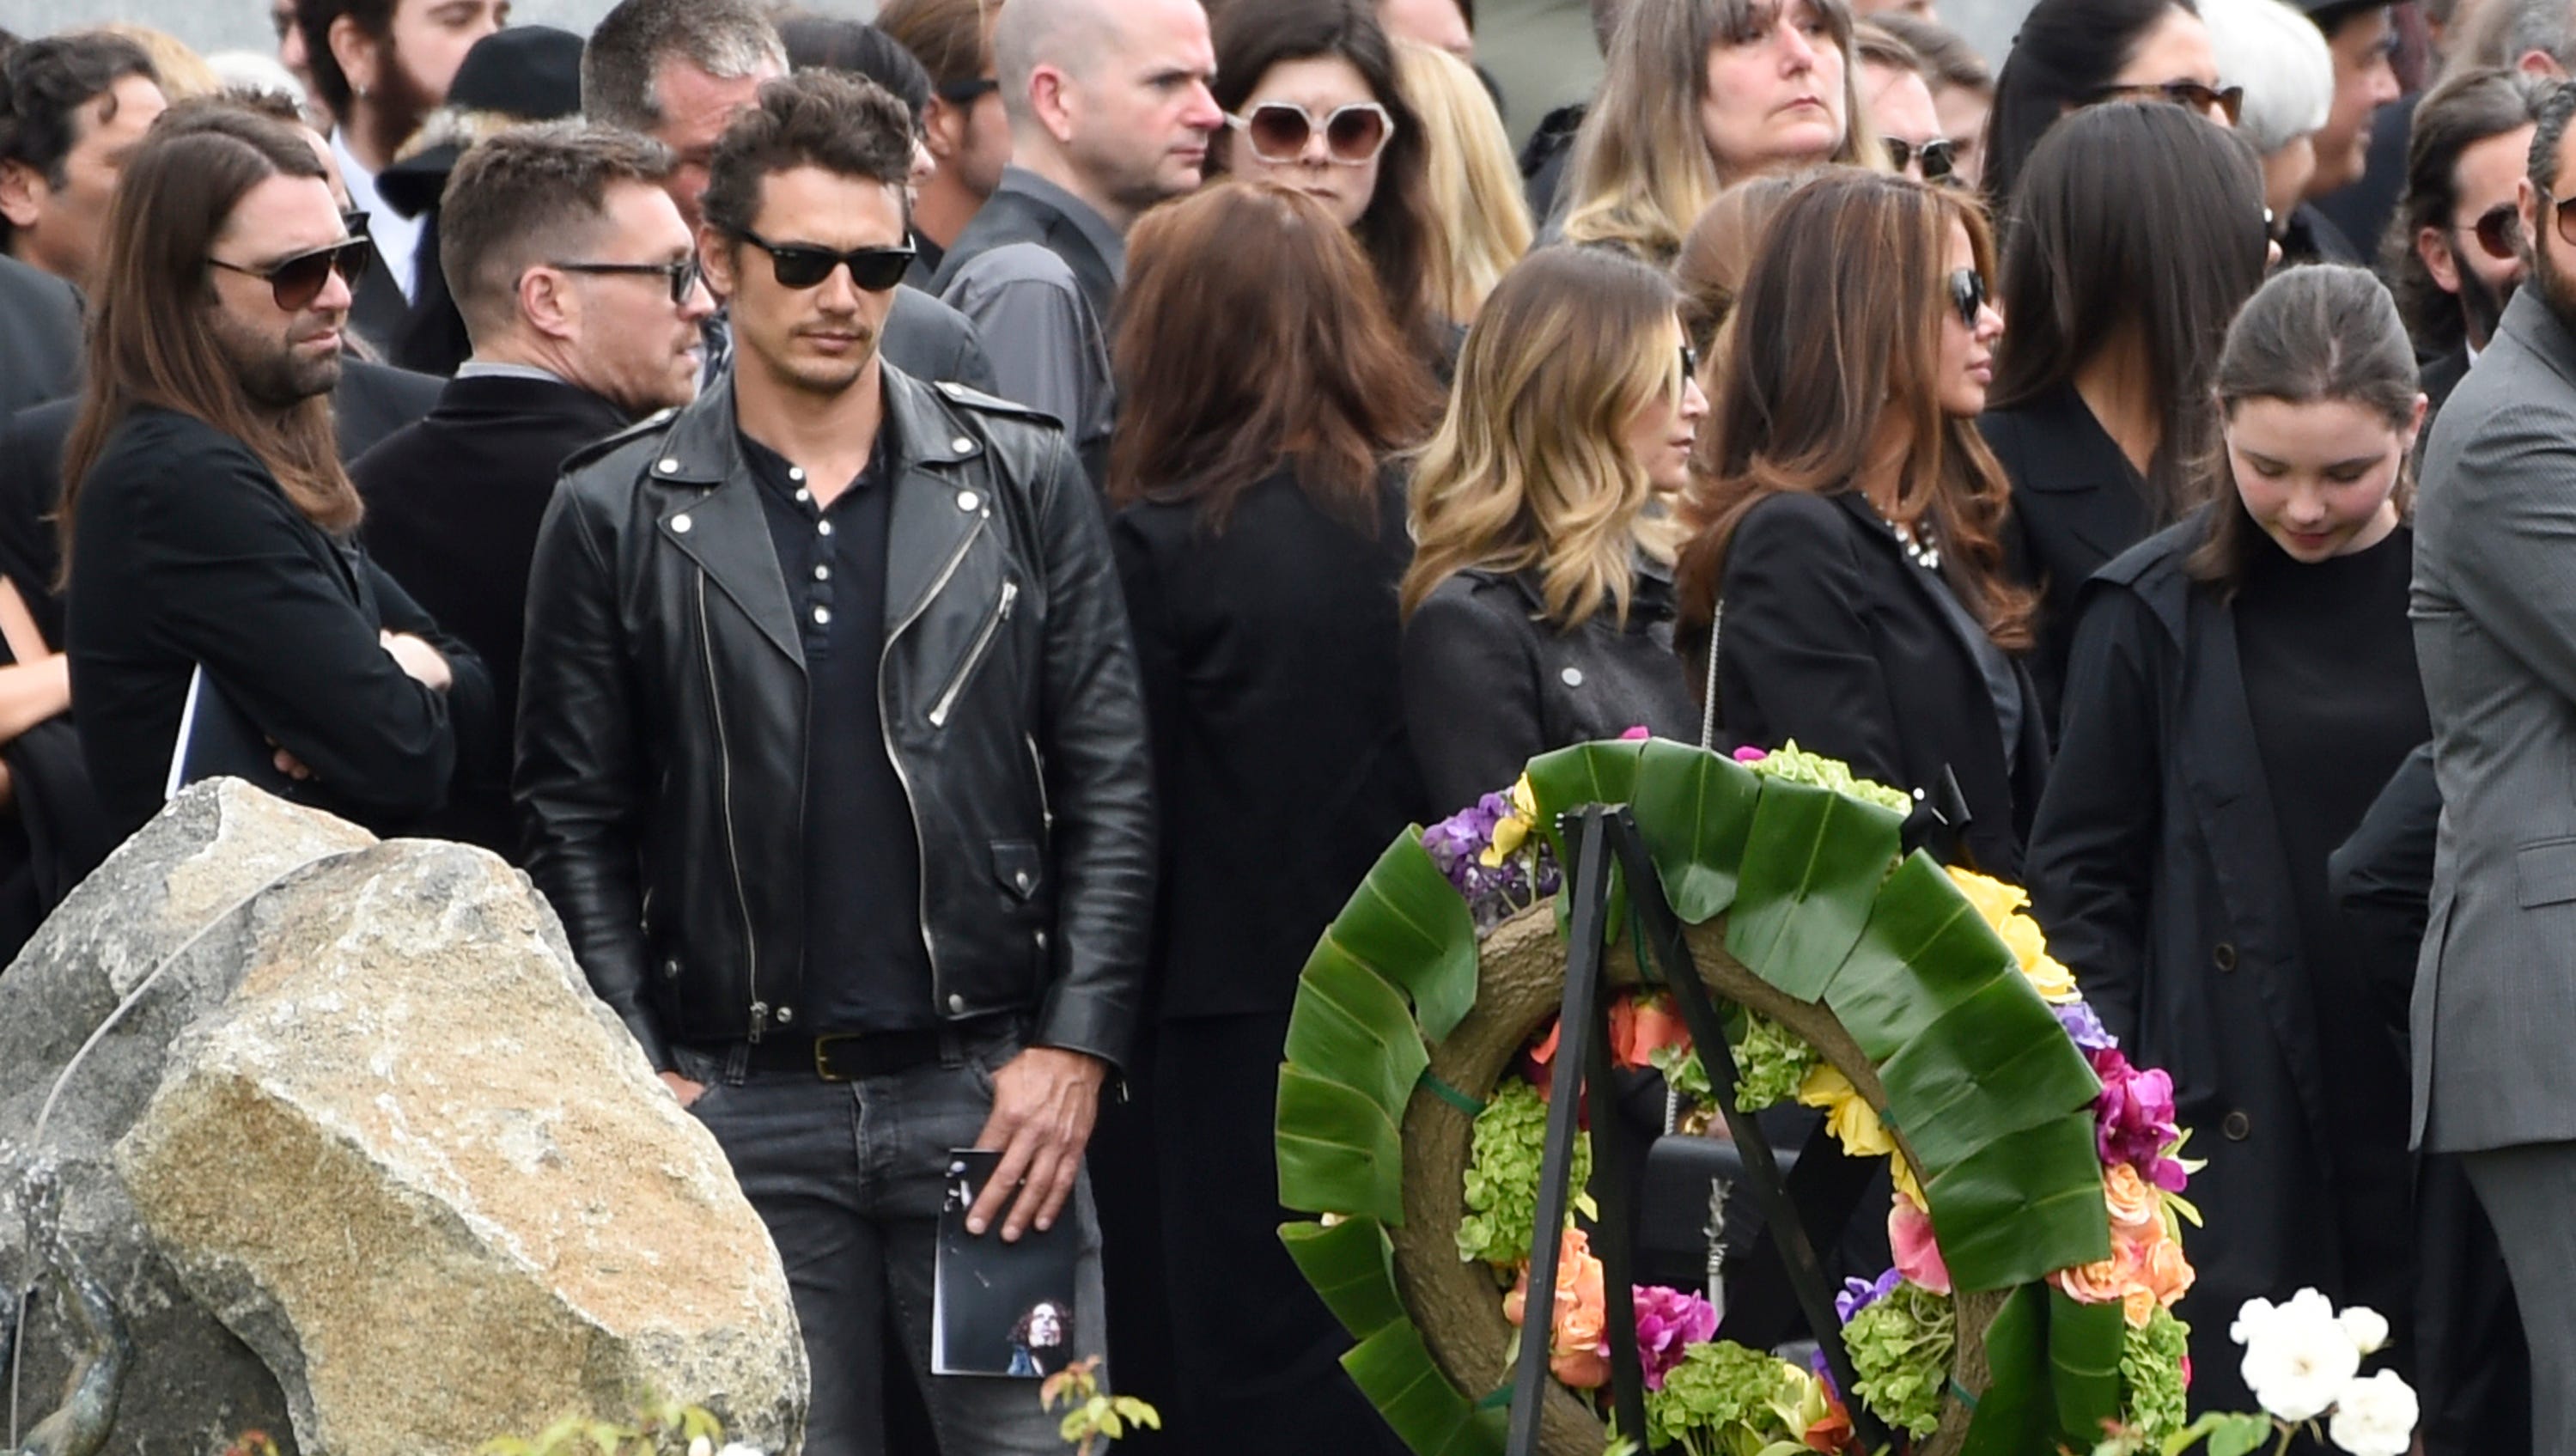 James Franco attends a funeral for Chris Cornell at the Hollywood Forever Cemetery on Friday, May 26, 2017, in Los Angeles.